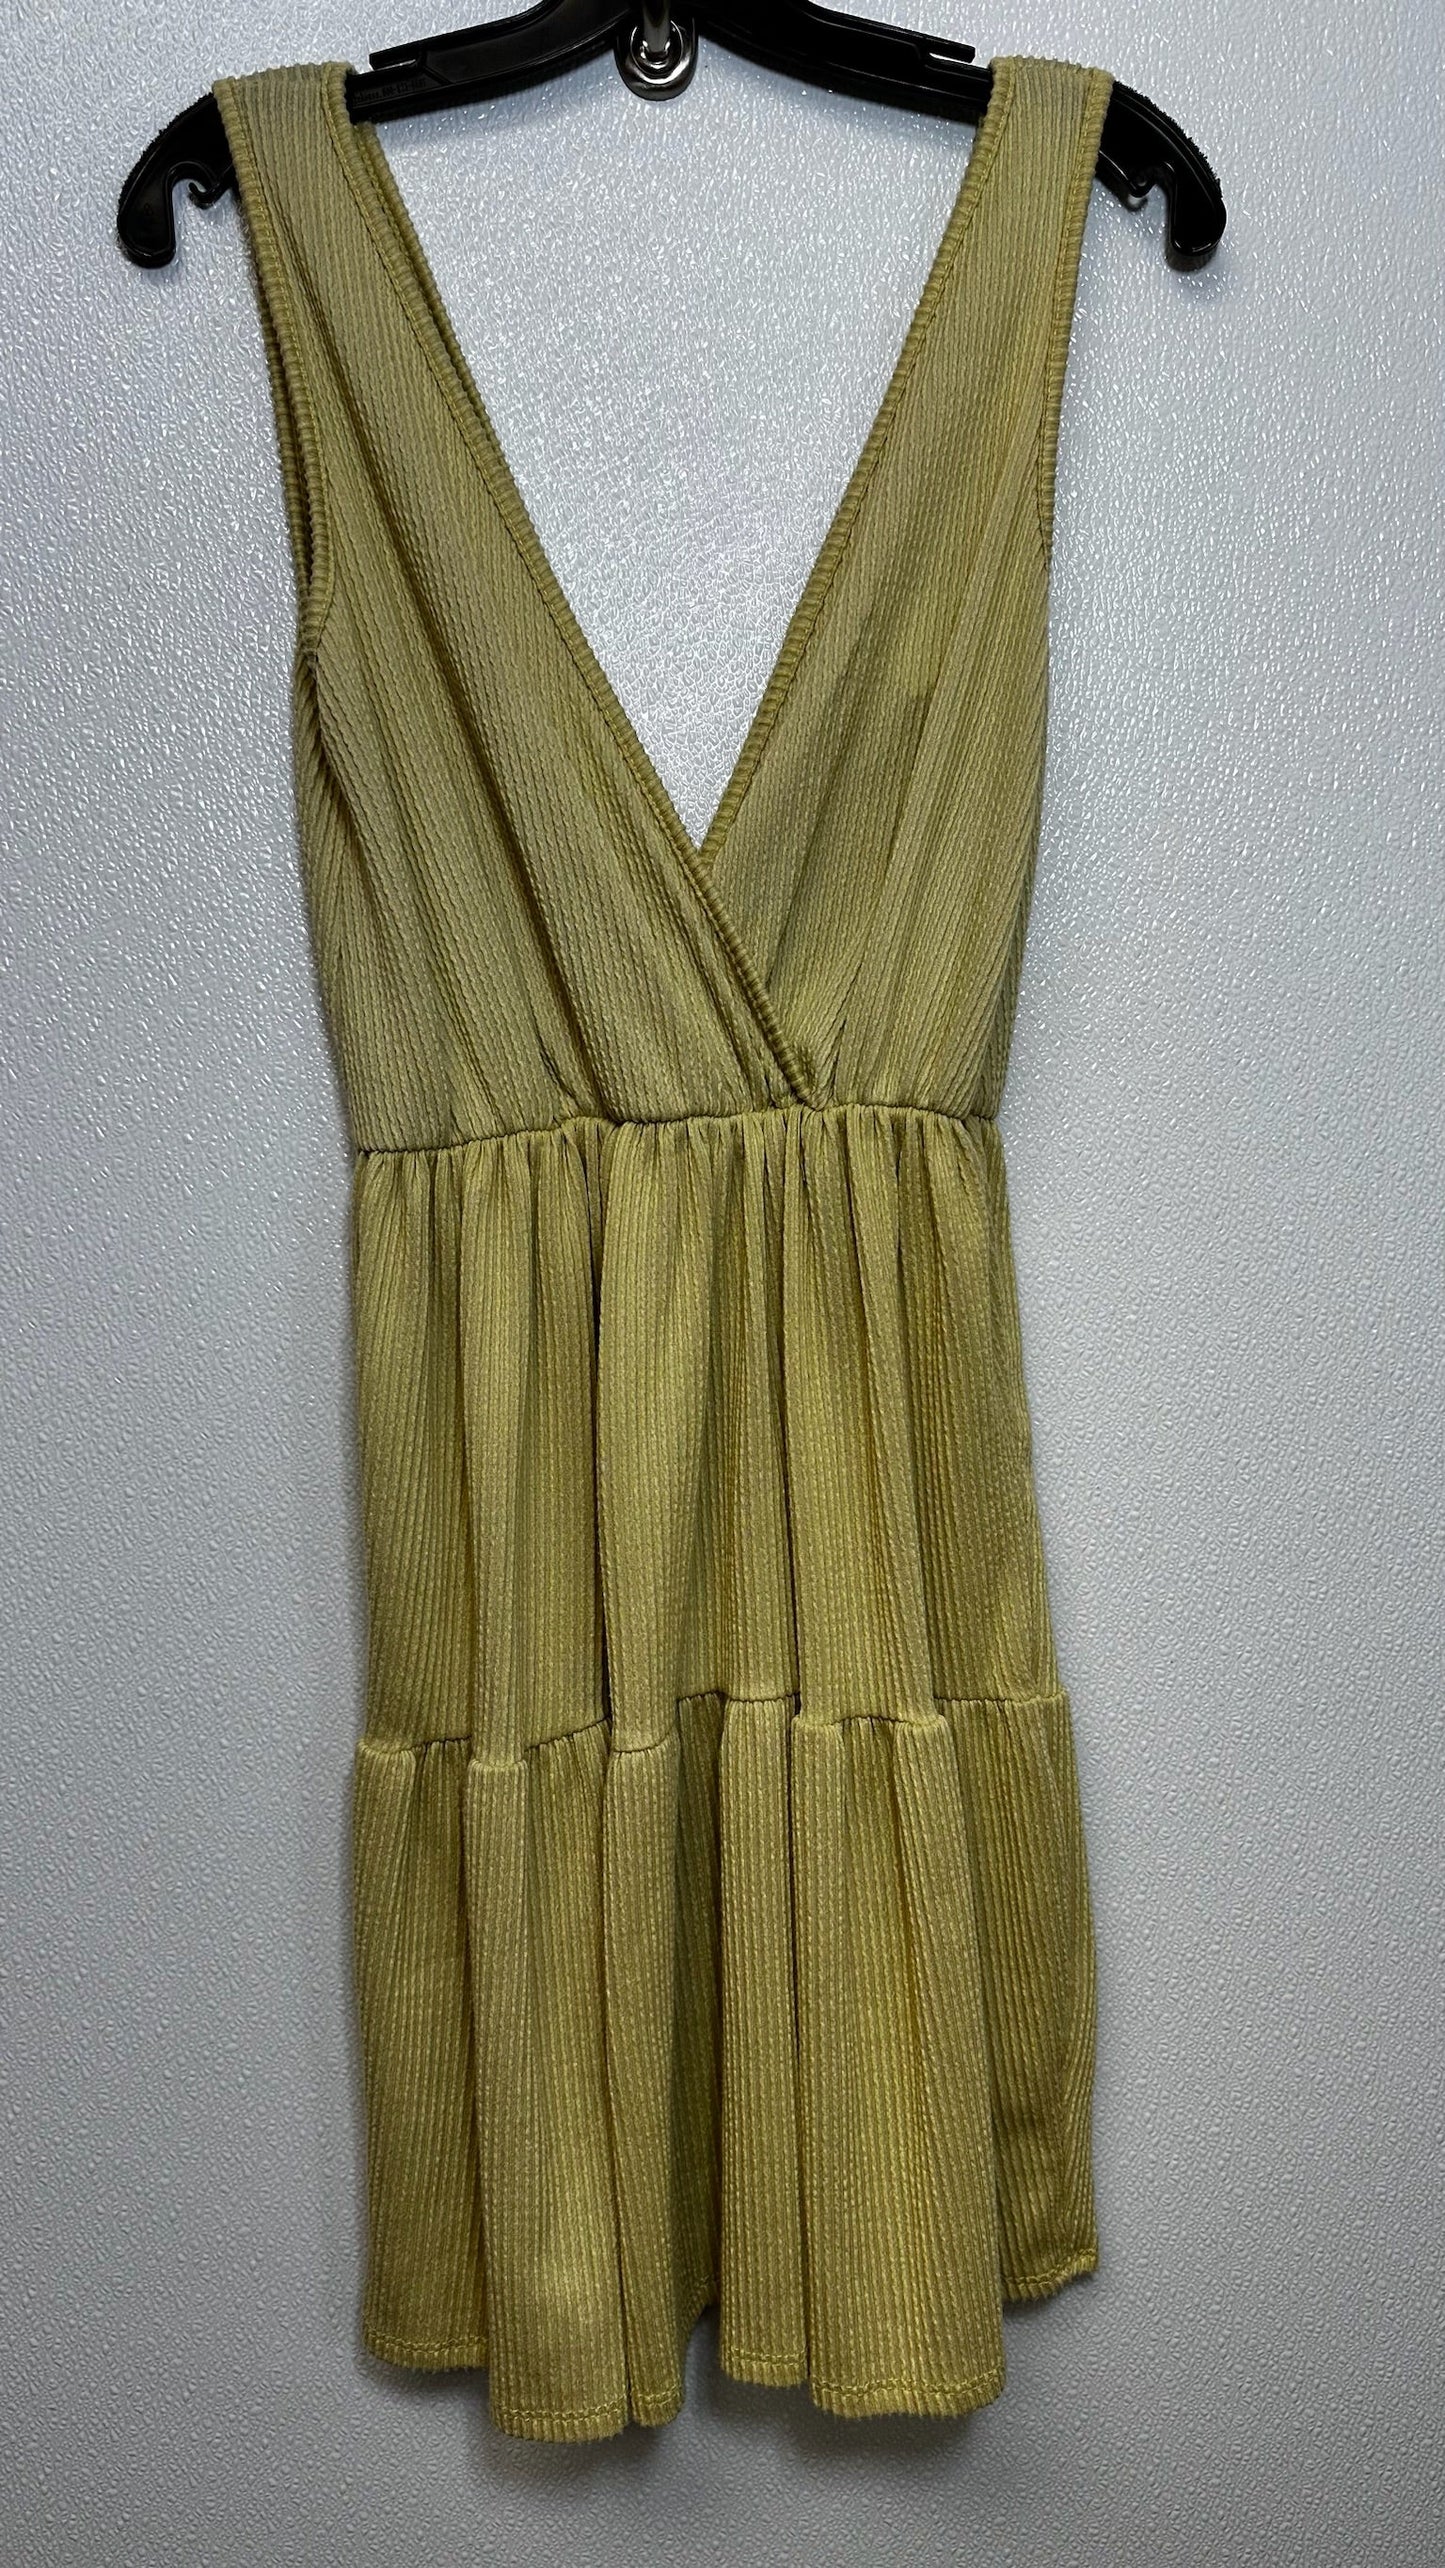 Tan Dress Casual Short Caution To The Wind, Size S